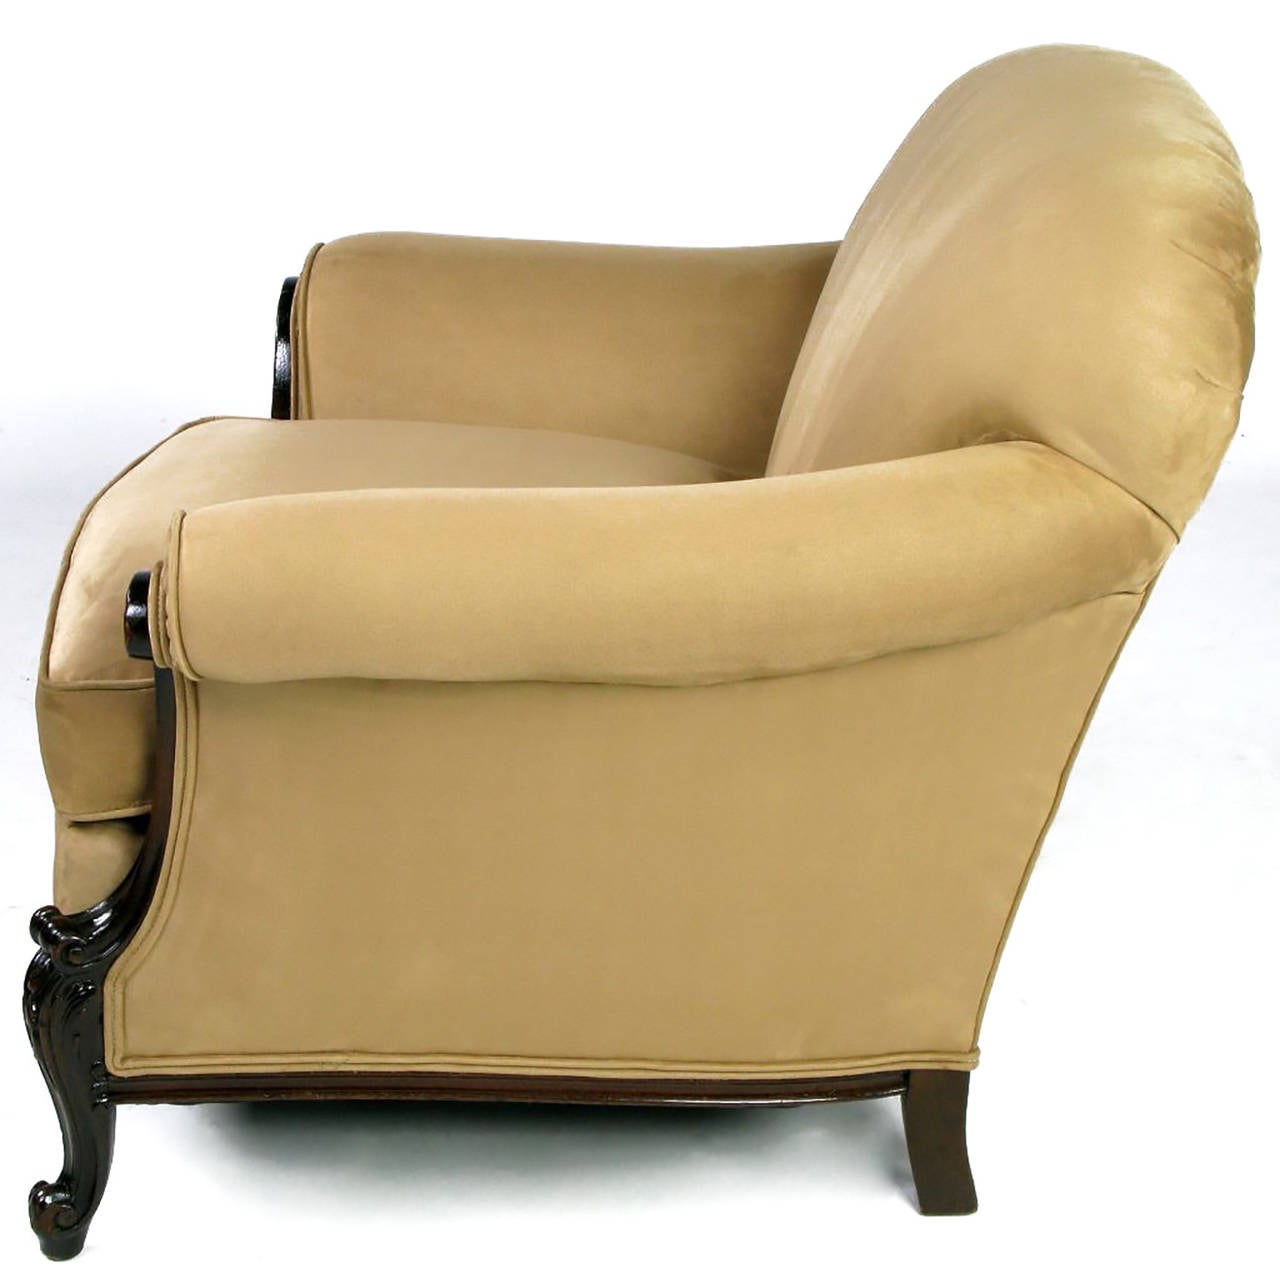 American Early 20th Century, Rolled-Arm Club Chair in Ultrasuede